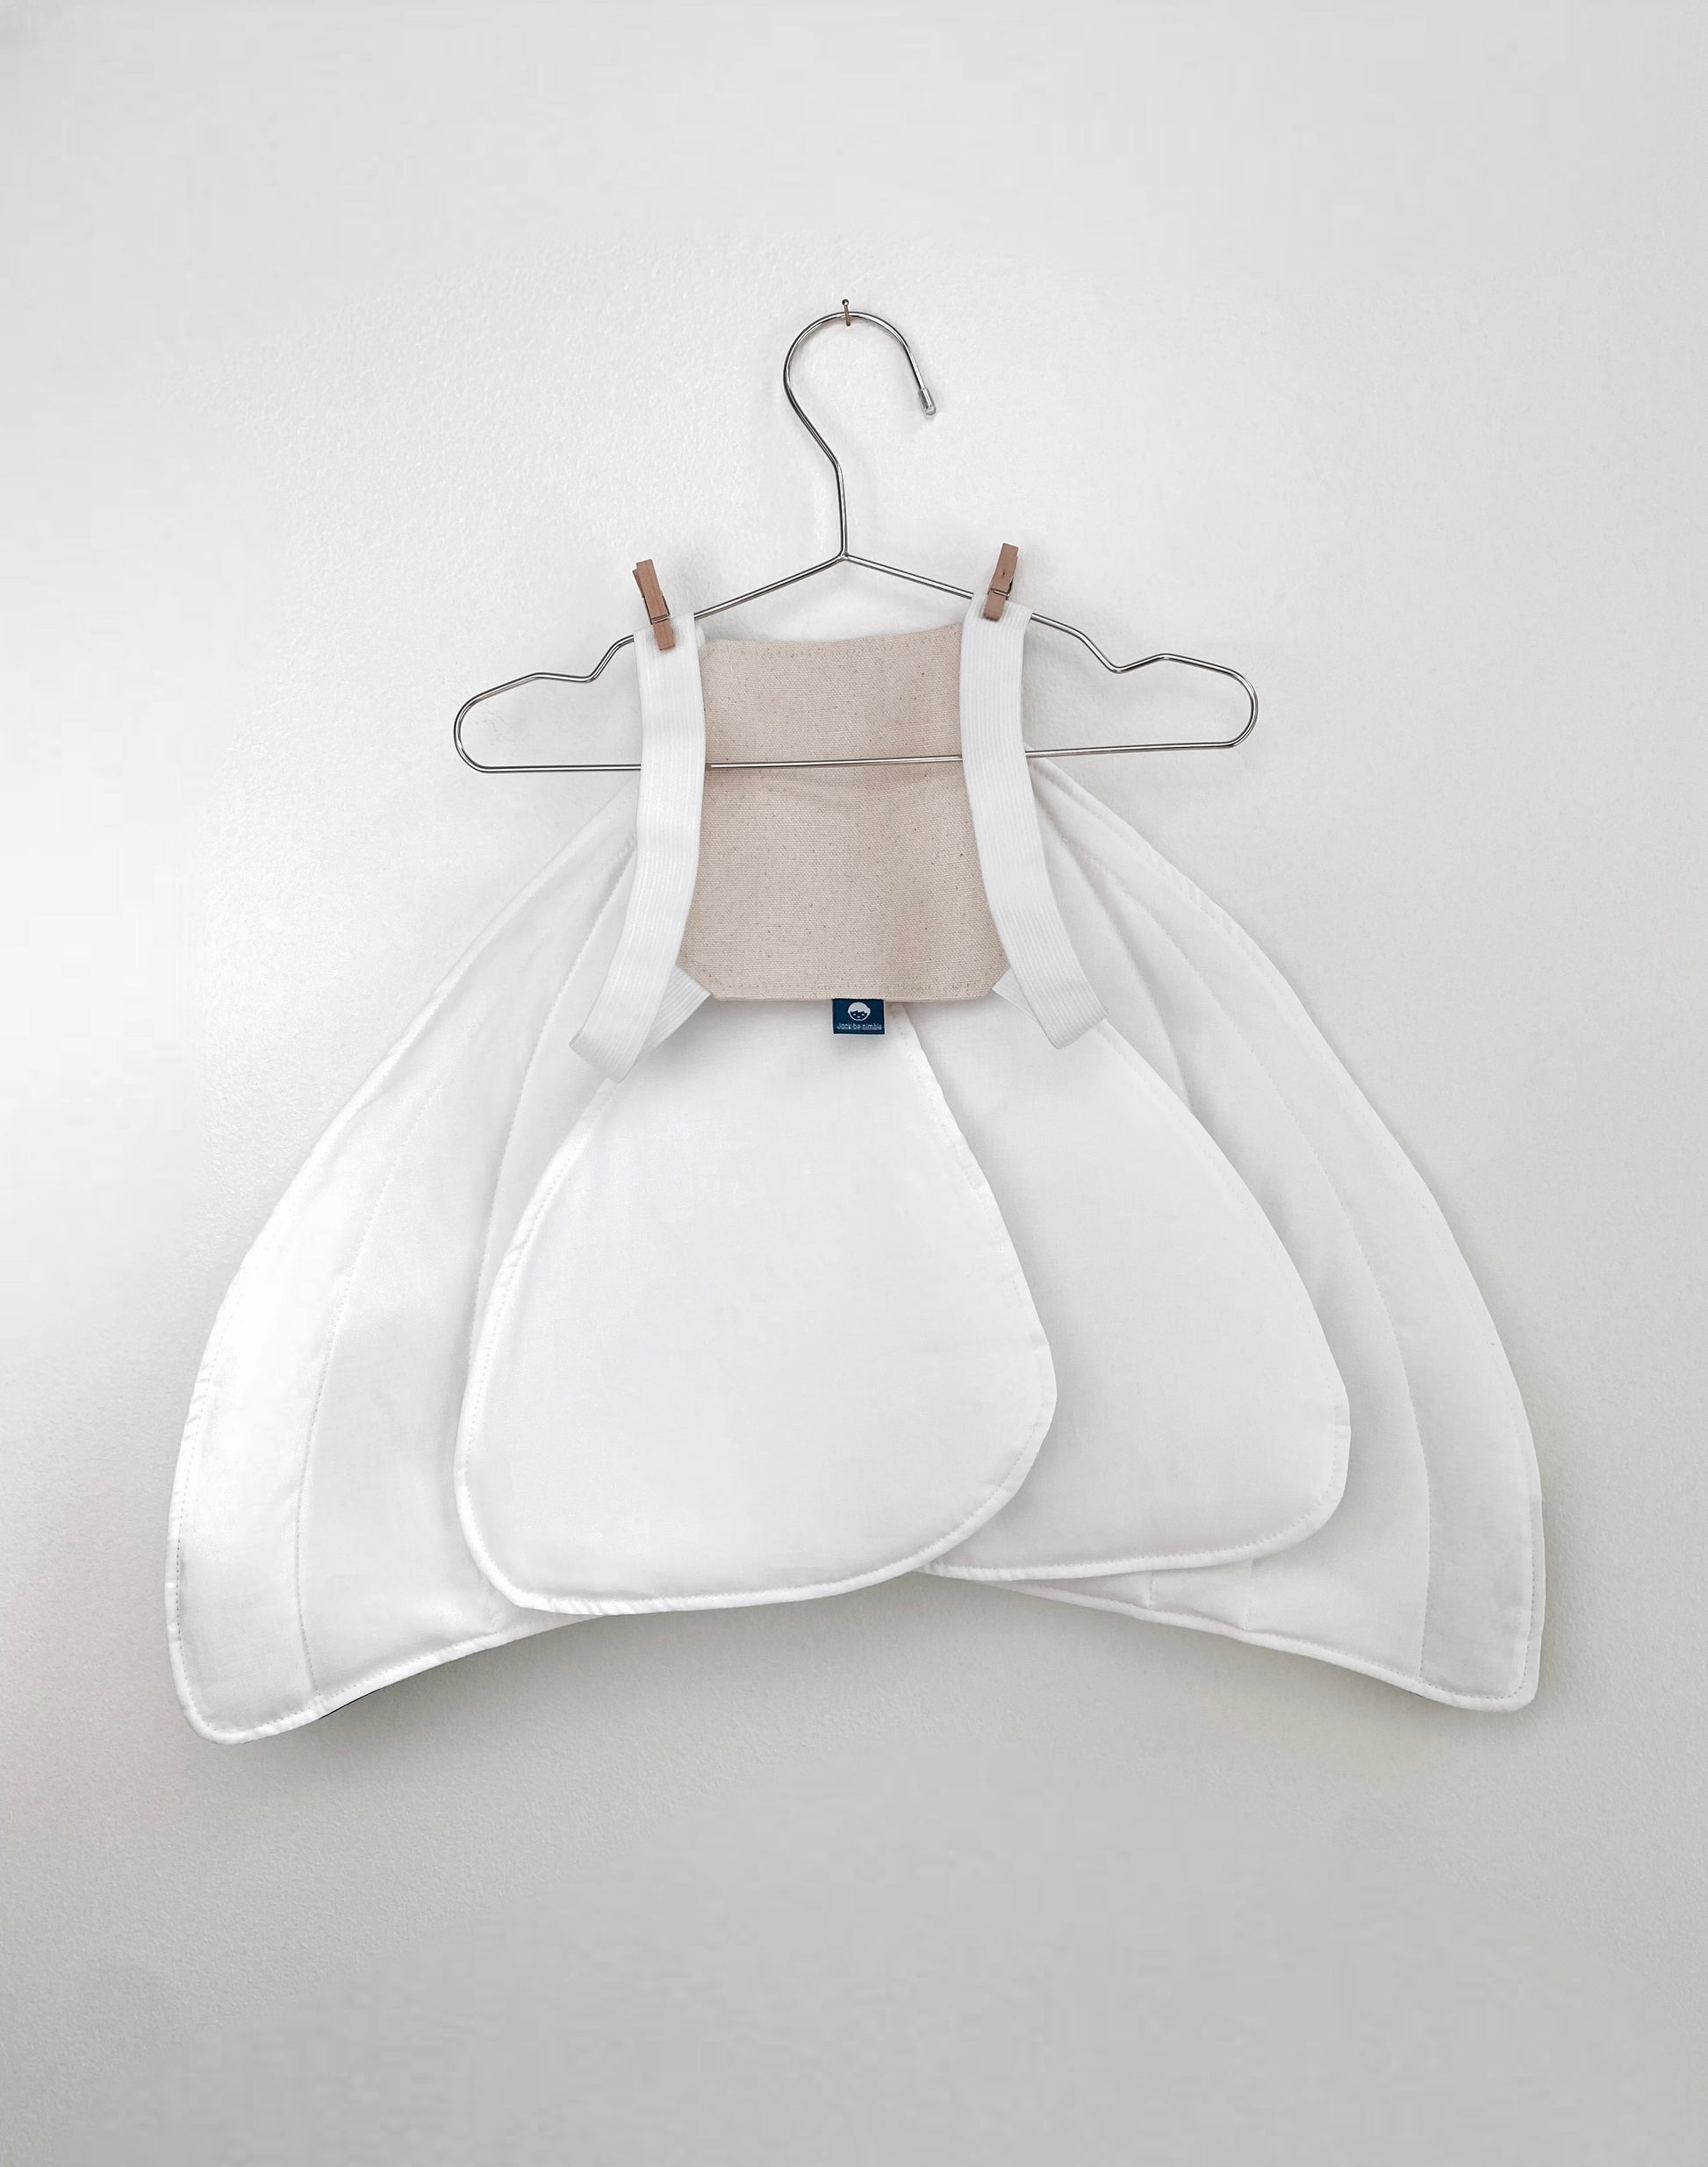 Kids white butterfly costume dress up wings for open-ended play.